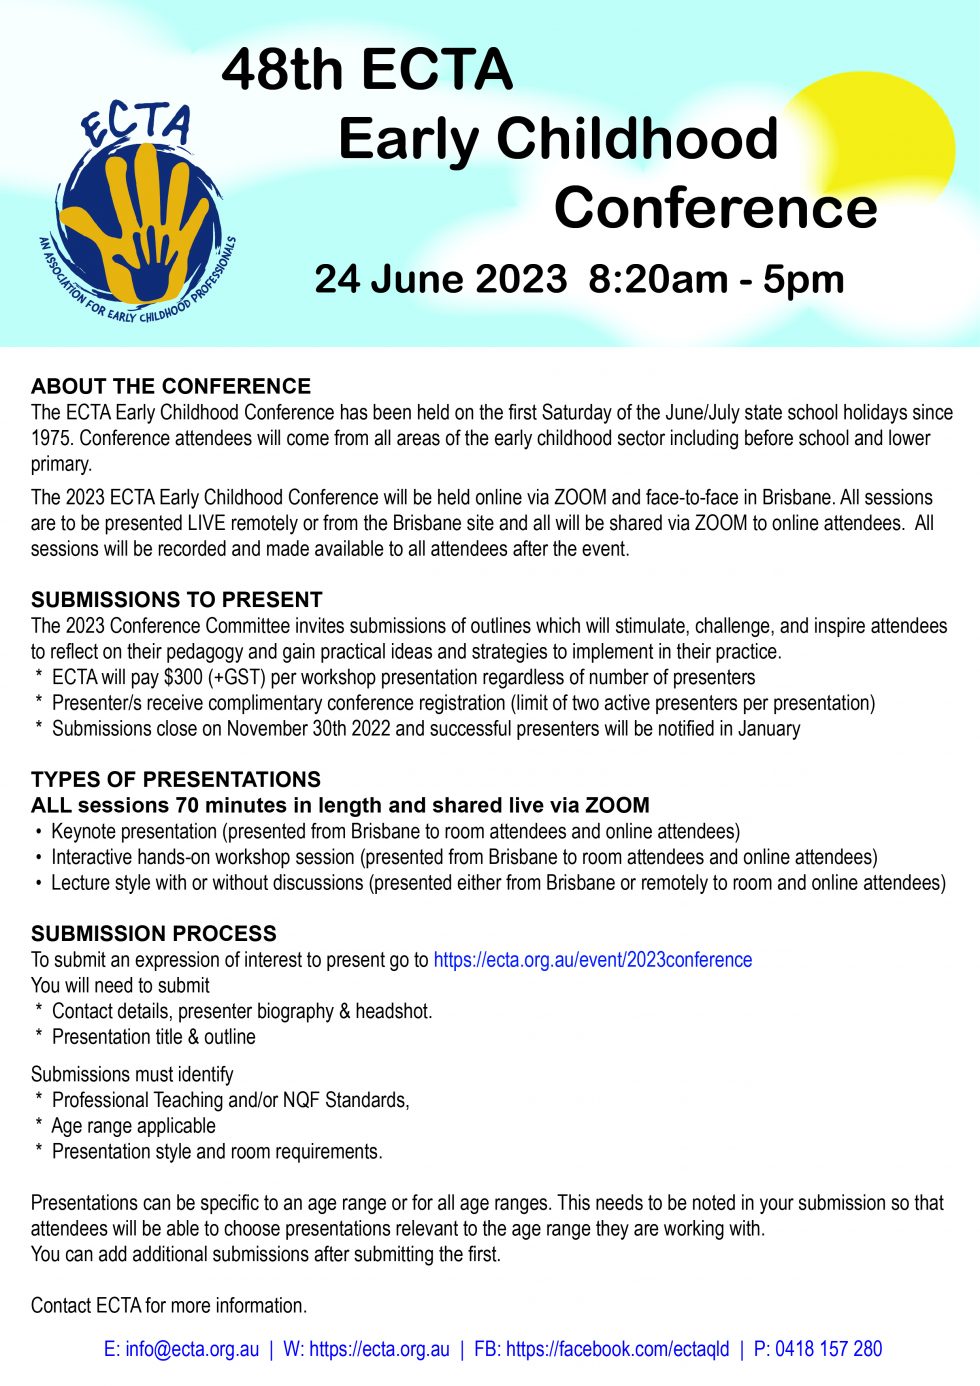 2023 ECTA Early Childhood Conference Early Childhood Teachers